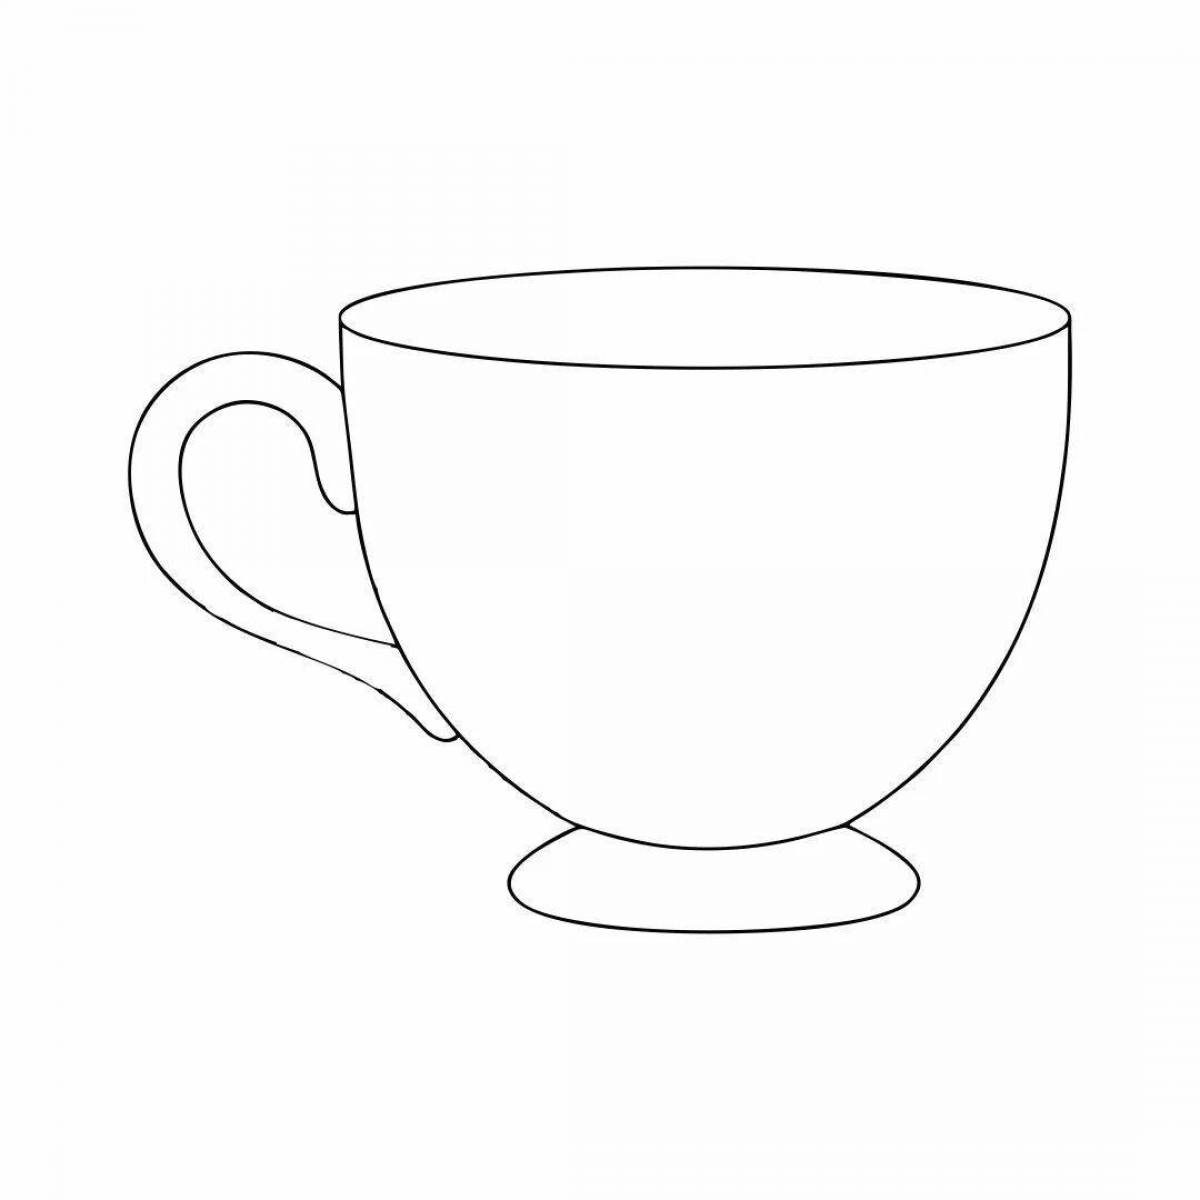 Fancy mug and saucer coloring book for kids